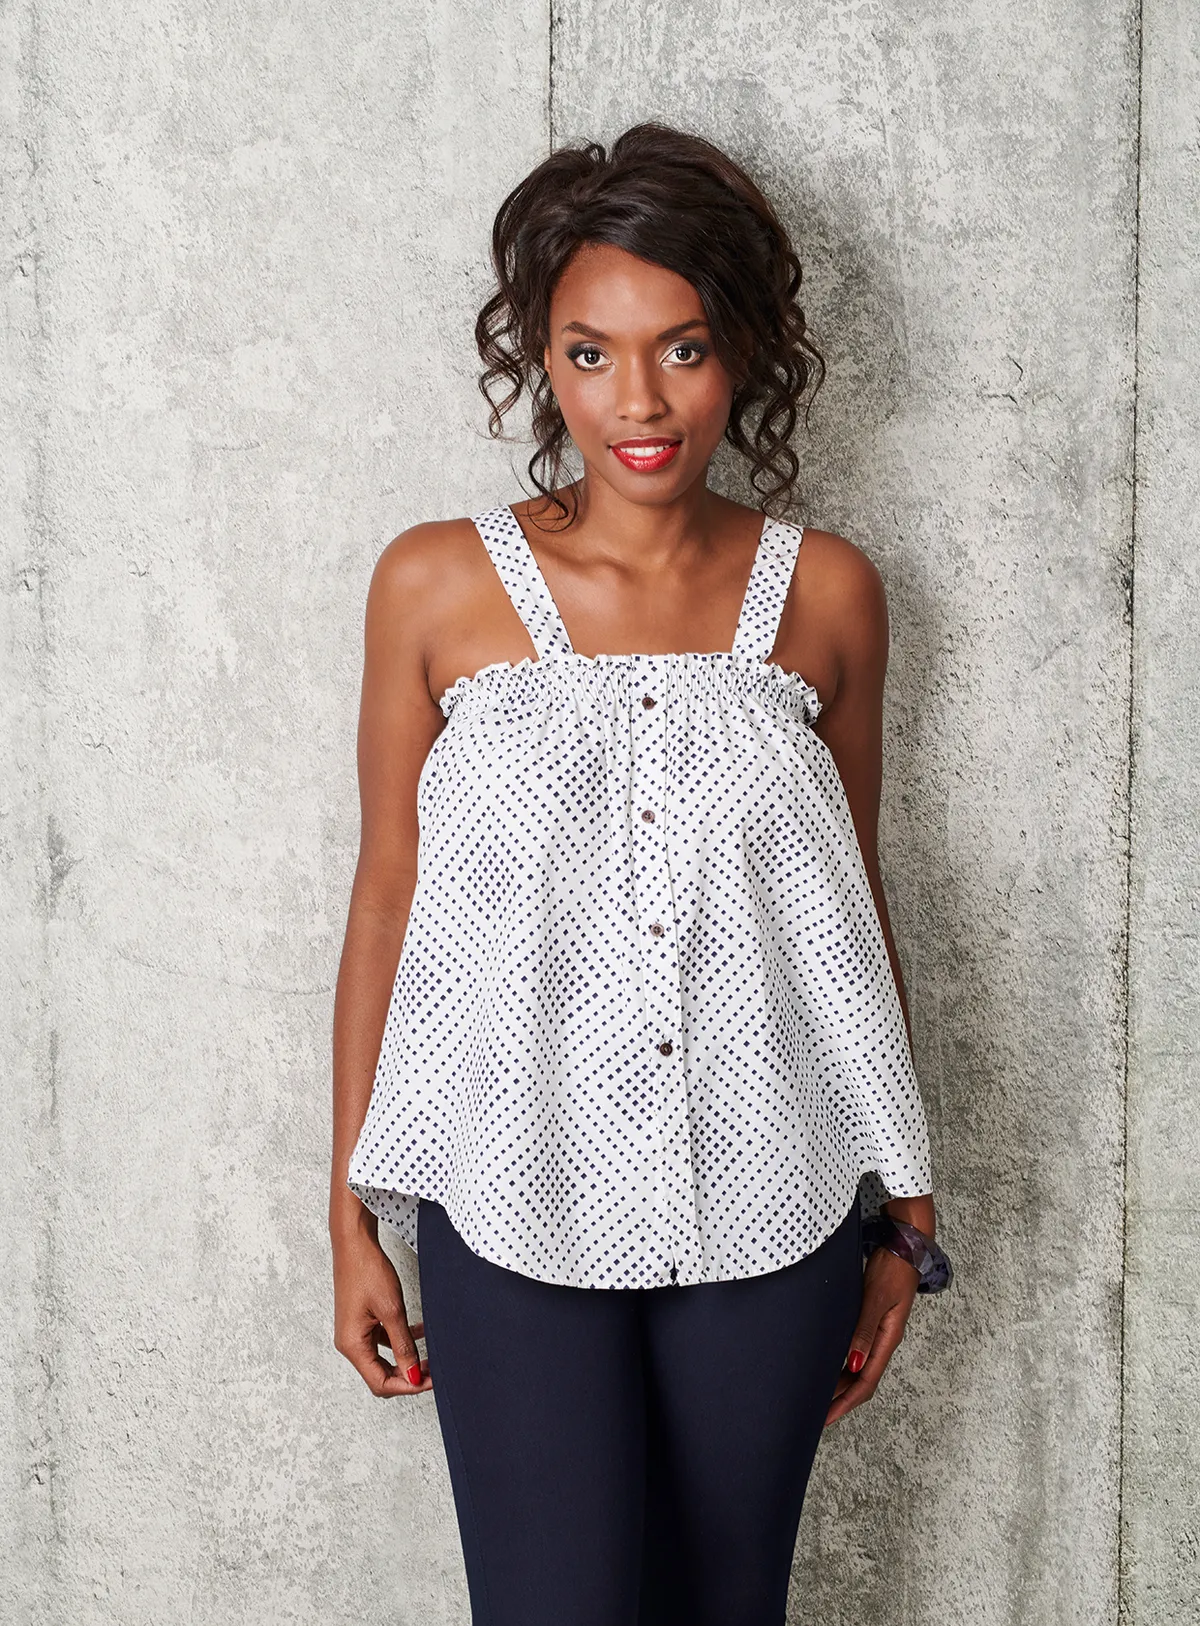 Cami top sewing pattern